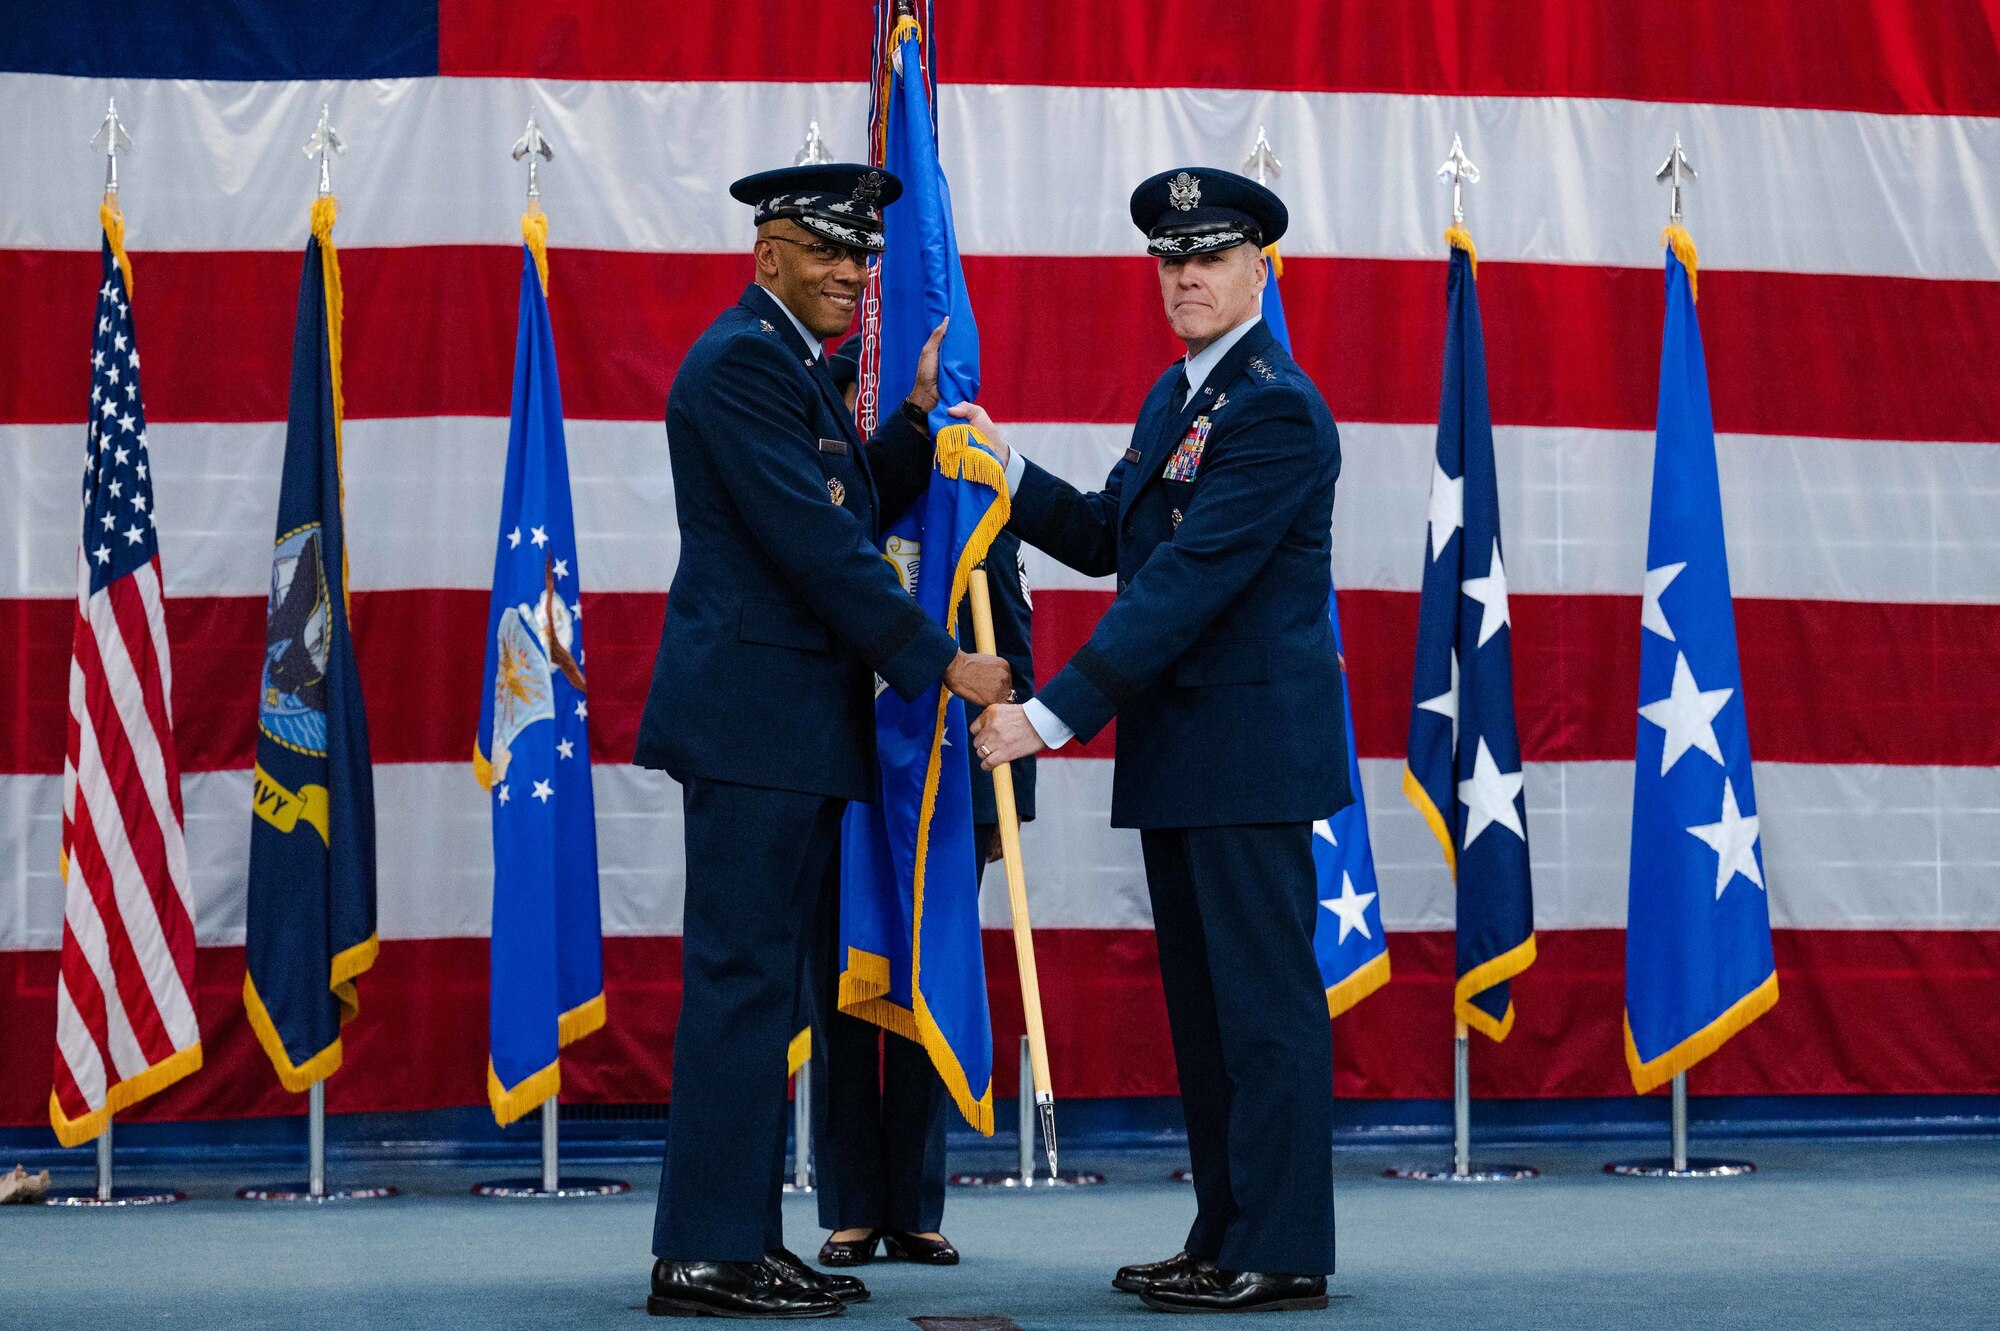 Gen. Thomas Bussiere, Air Force Global Strike Command commander, receives the guidon from Air Force Chief of Staff Gen. CQ Brown, Jr. during the AFGSC assumption of command Barksdale Air Force Base, La., Dec. 7, 2022. The passing of the unit’s guidon symbolizes the official transfer of command to Bussiere.